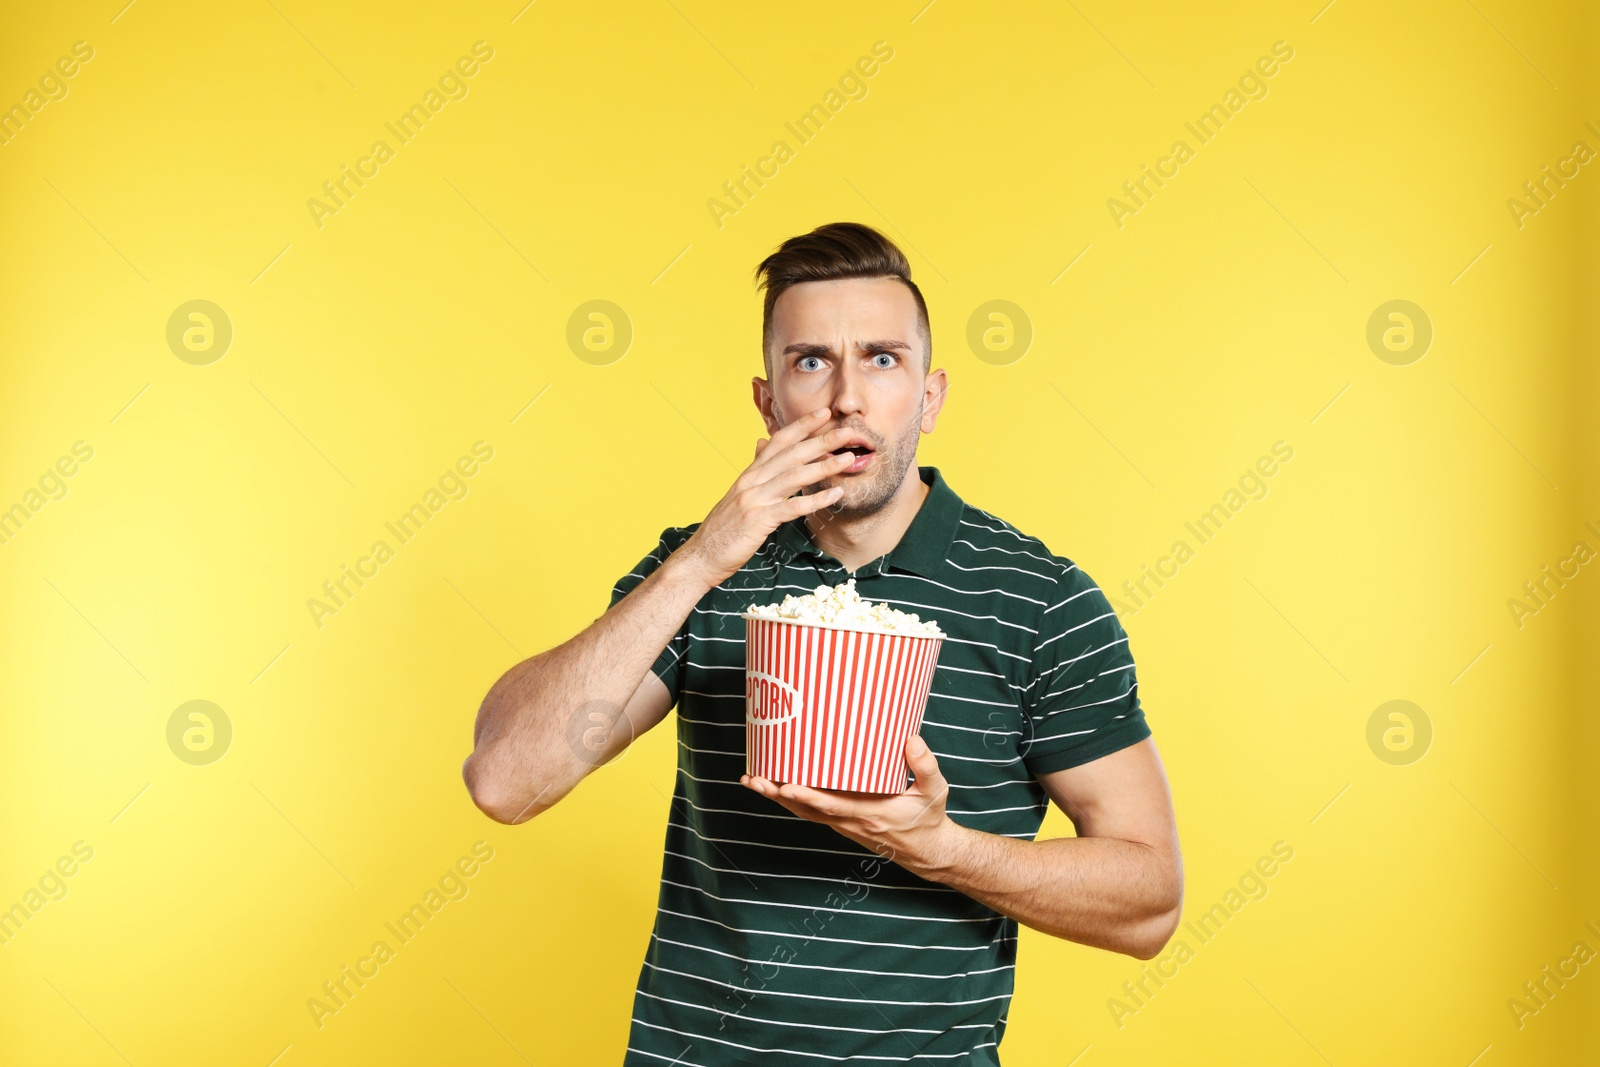 Photo of Emotional man with popcorn during cinema show on color background